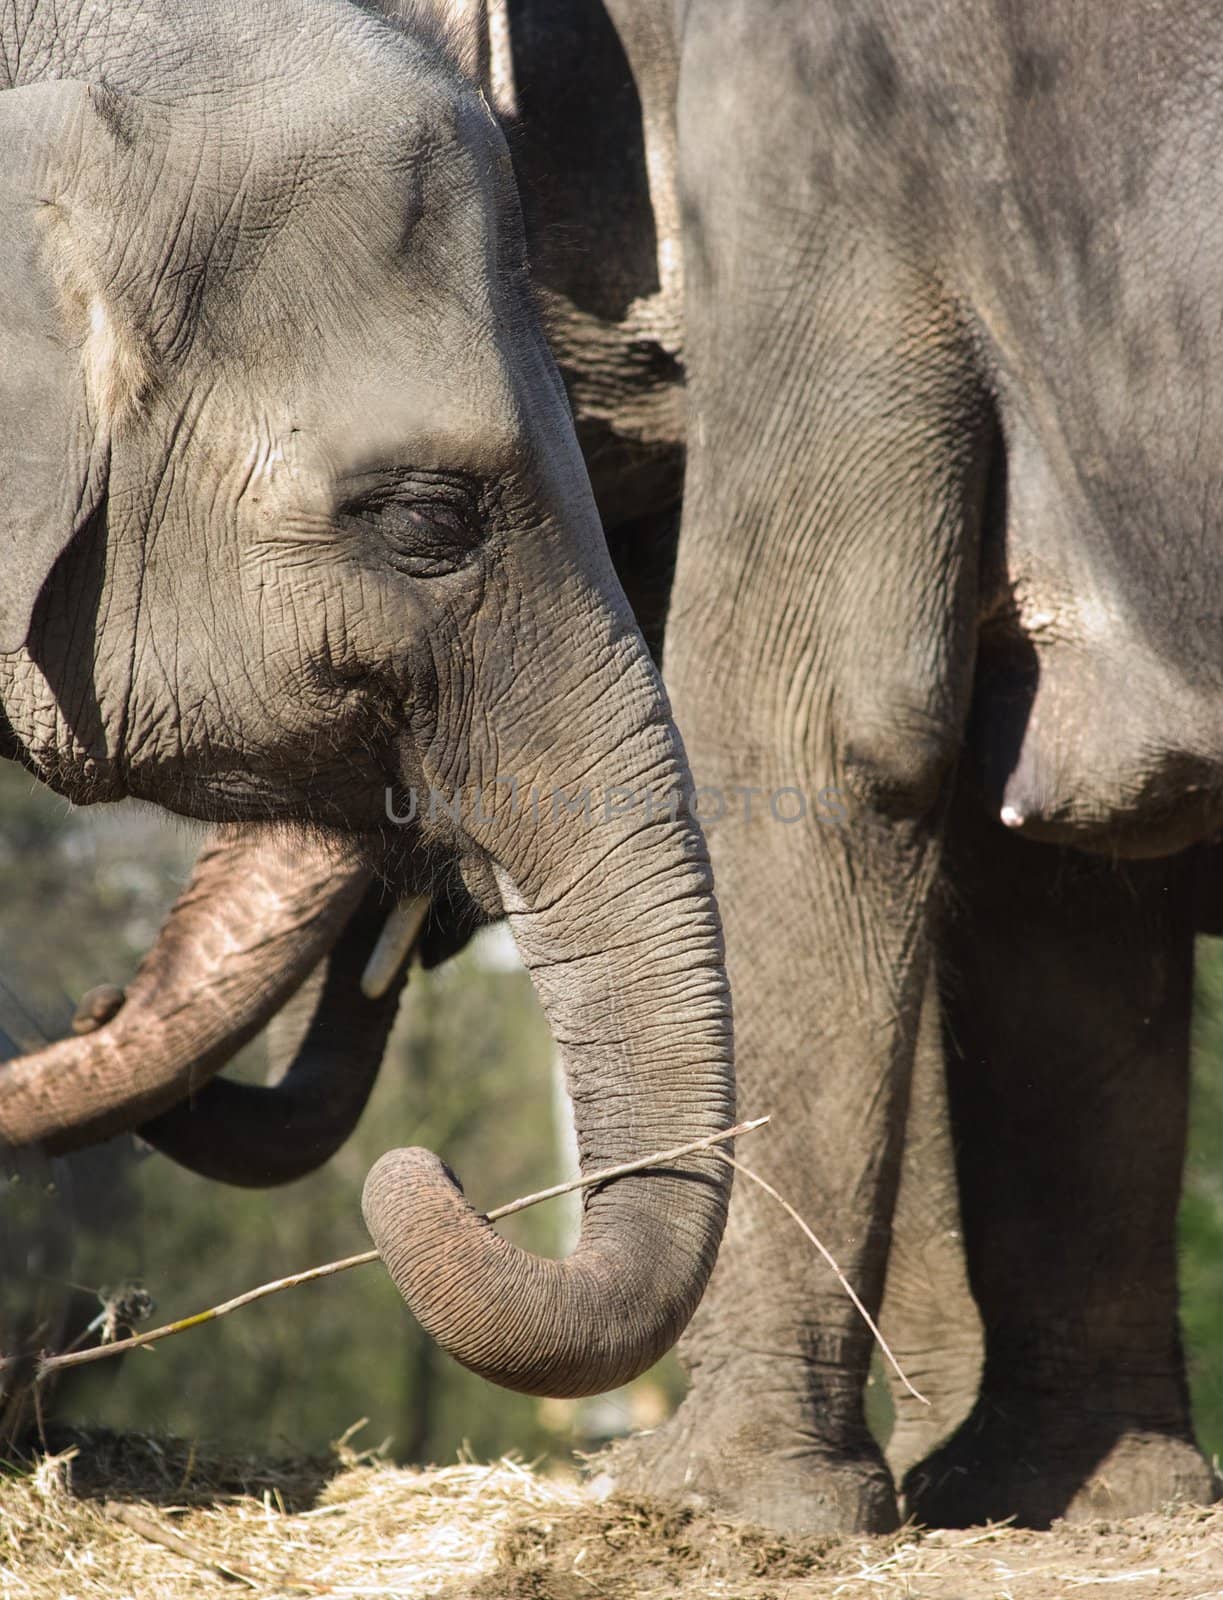 Asian elephants - mother and kid
playing with branch